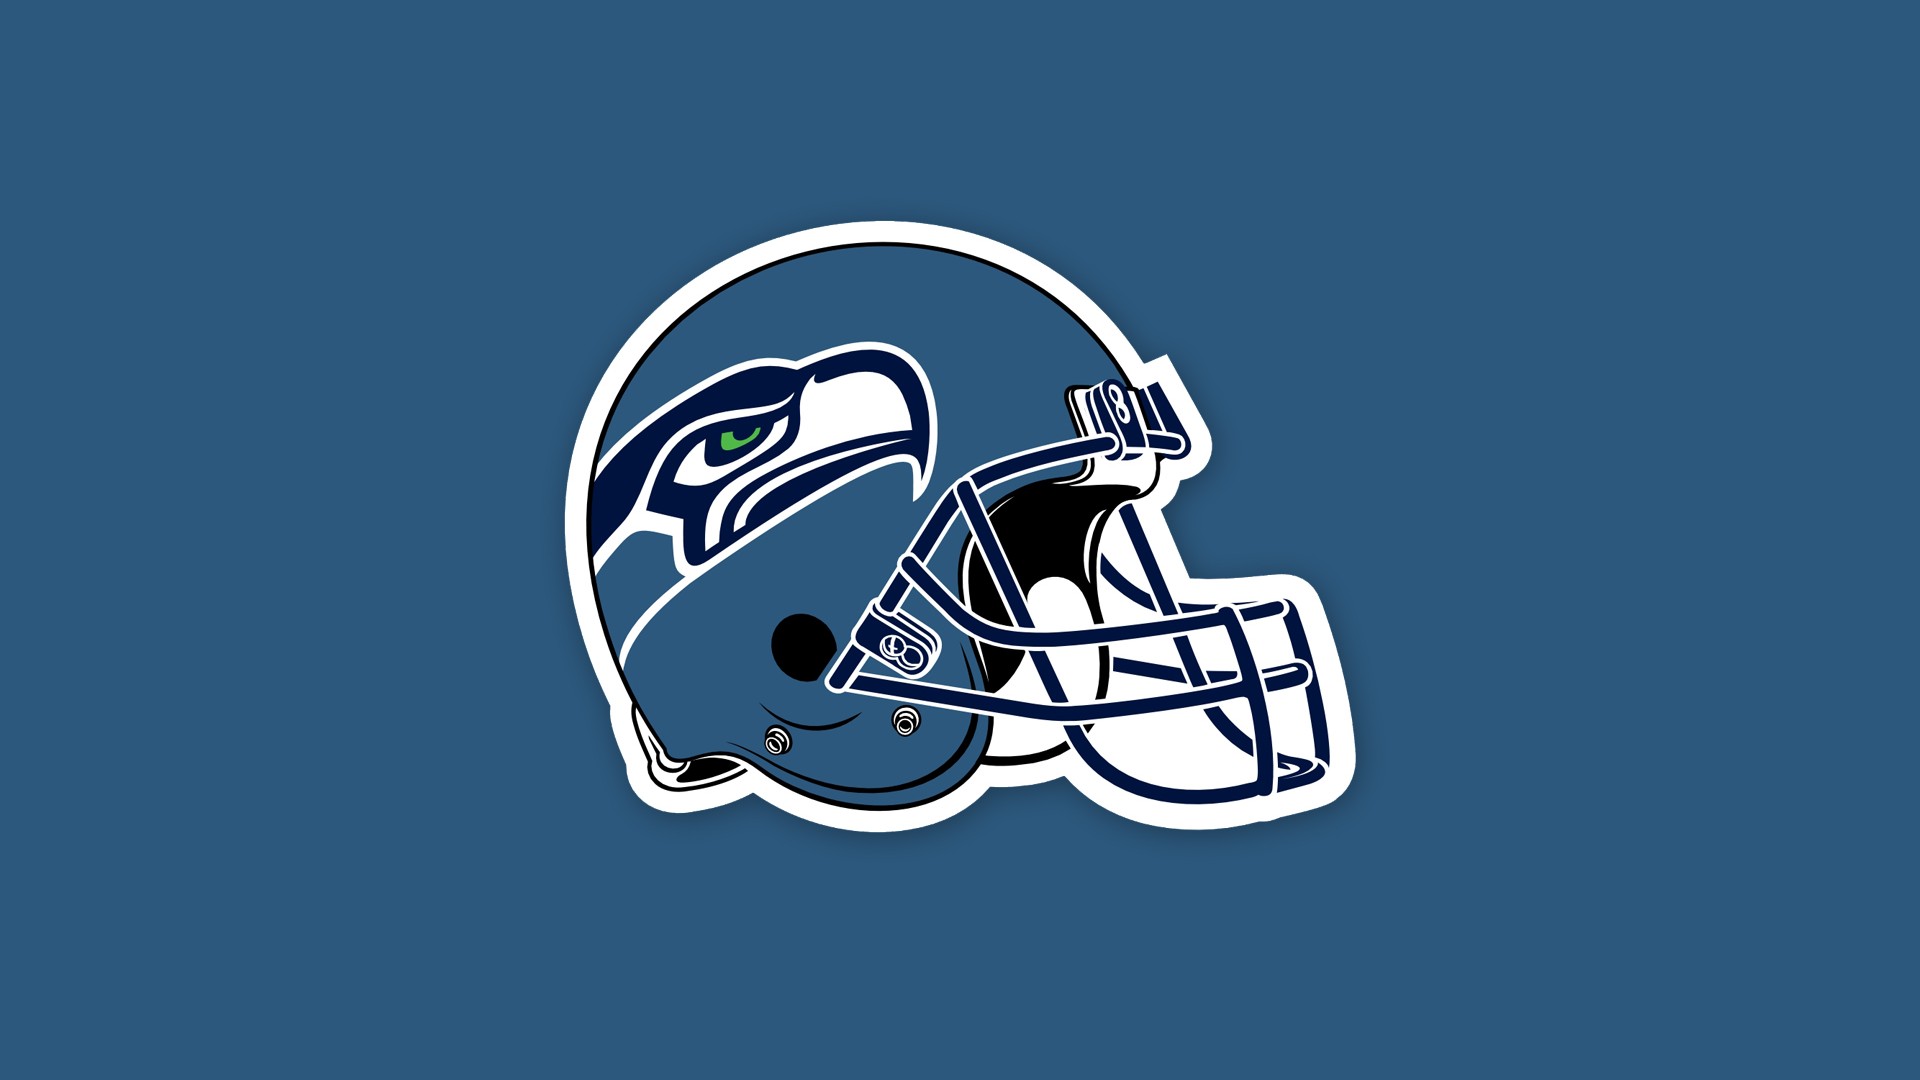 HD Backgrounds Seattle Seahawks with high-resolution 1920x1080 pixel. You can use this wallpaper for your Mac or Windows Desktop Background, iPhone, Android or Tablet and another Smartphone device